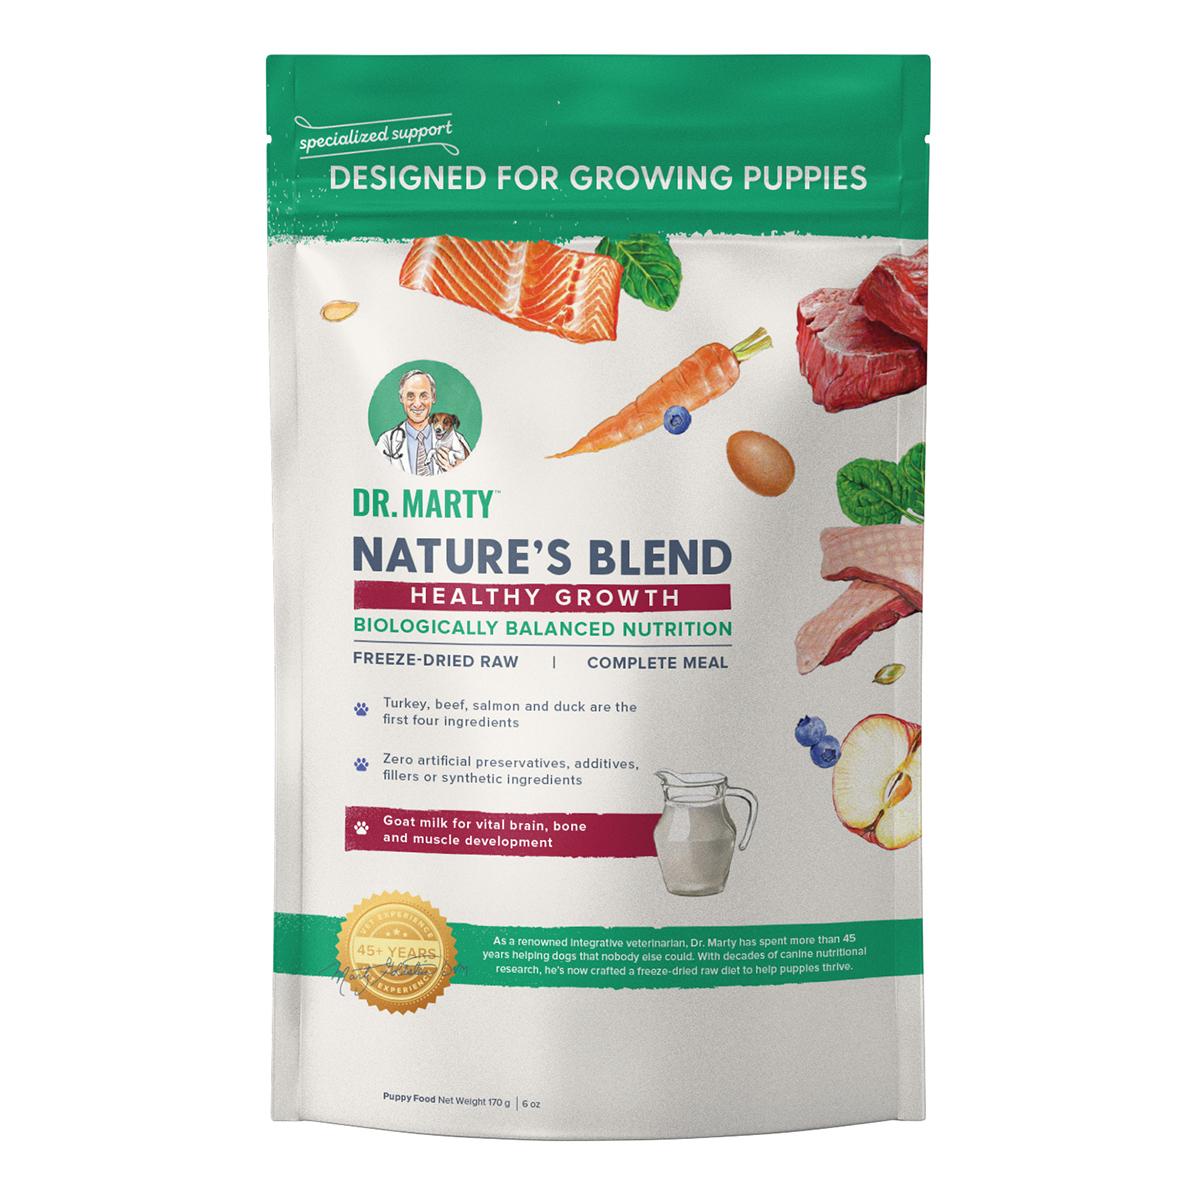 Dr. Marty Nature's Blend Healthy Growth for Puppies Freeze-Dried Dog Food